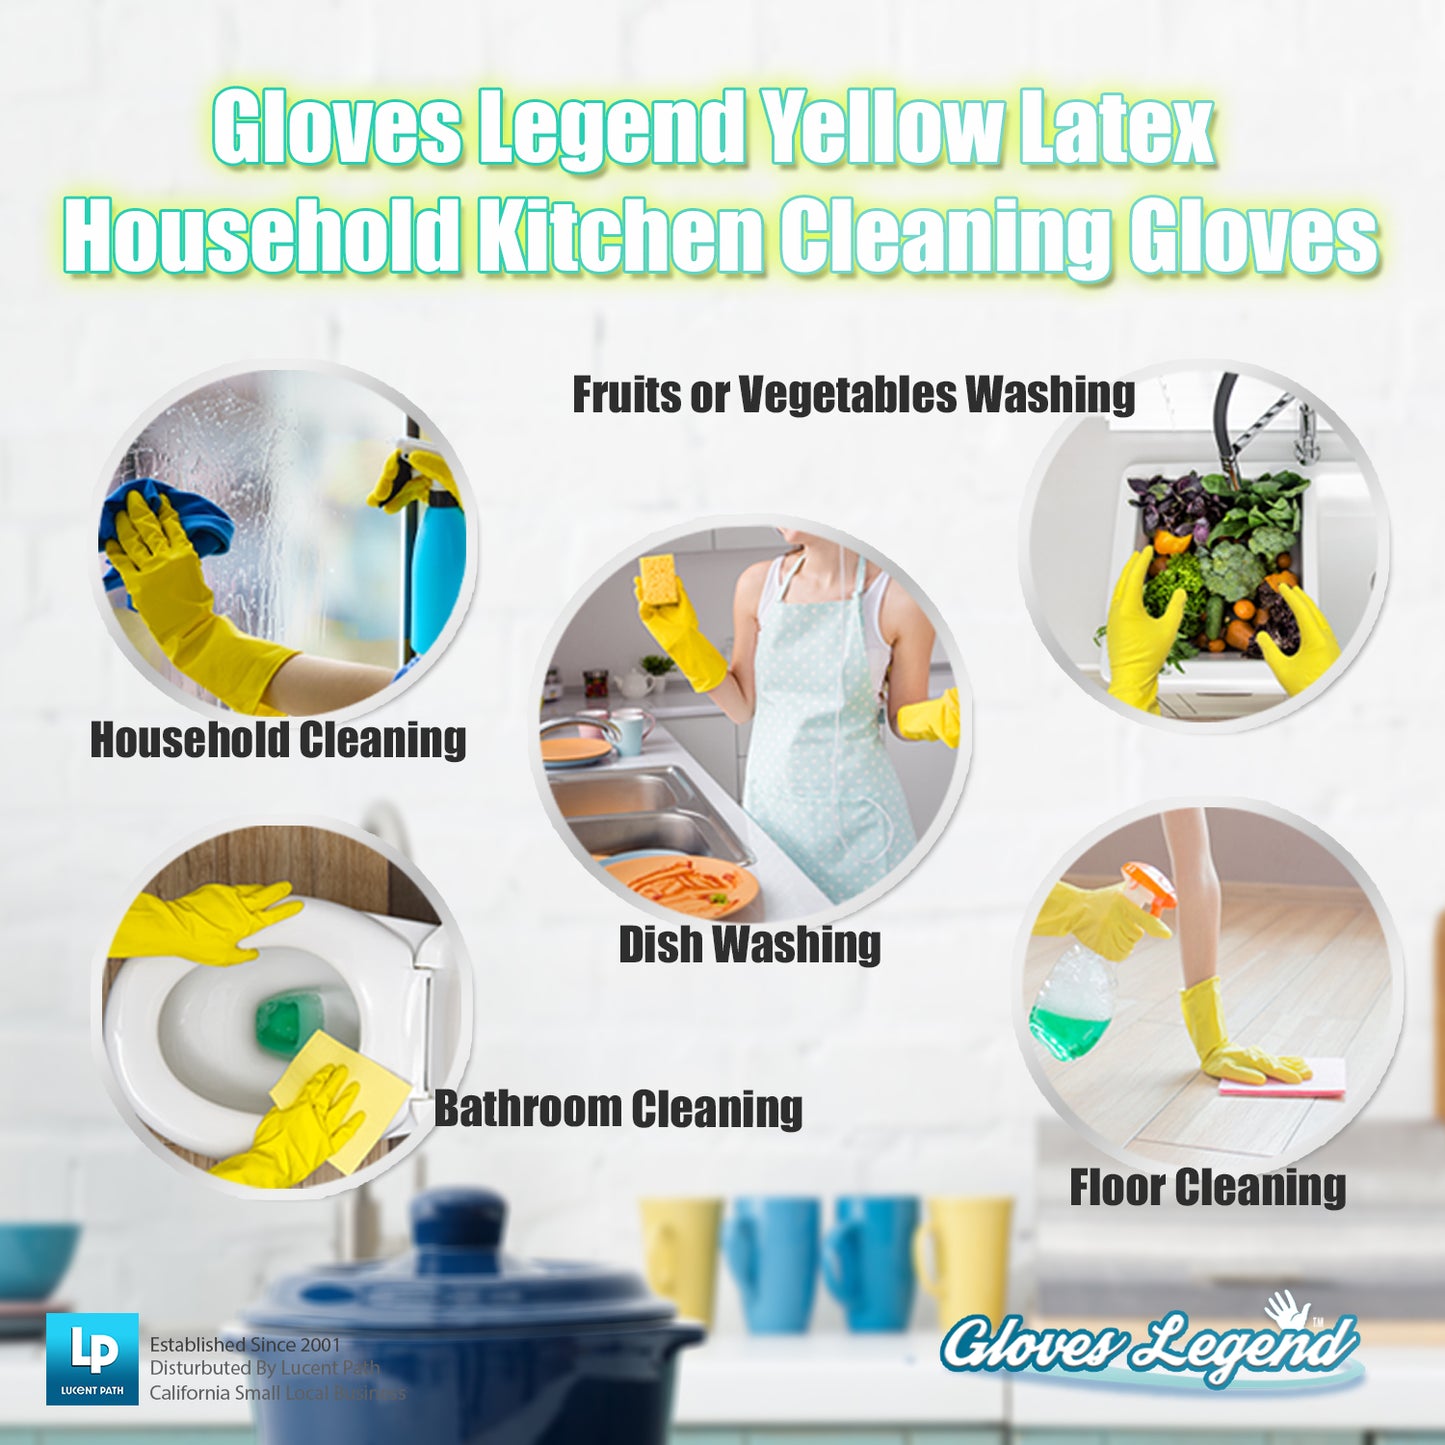 Large - 3 Pairs (6 Gloves) 12" Gloves Legend Yellow Latex Household Kitchen Cleaning Dishwashing Gloves - 18 mil